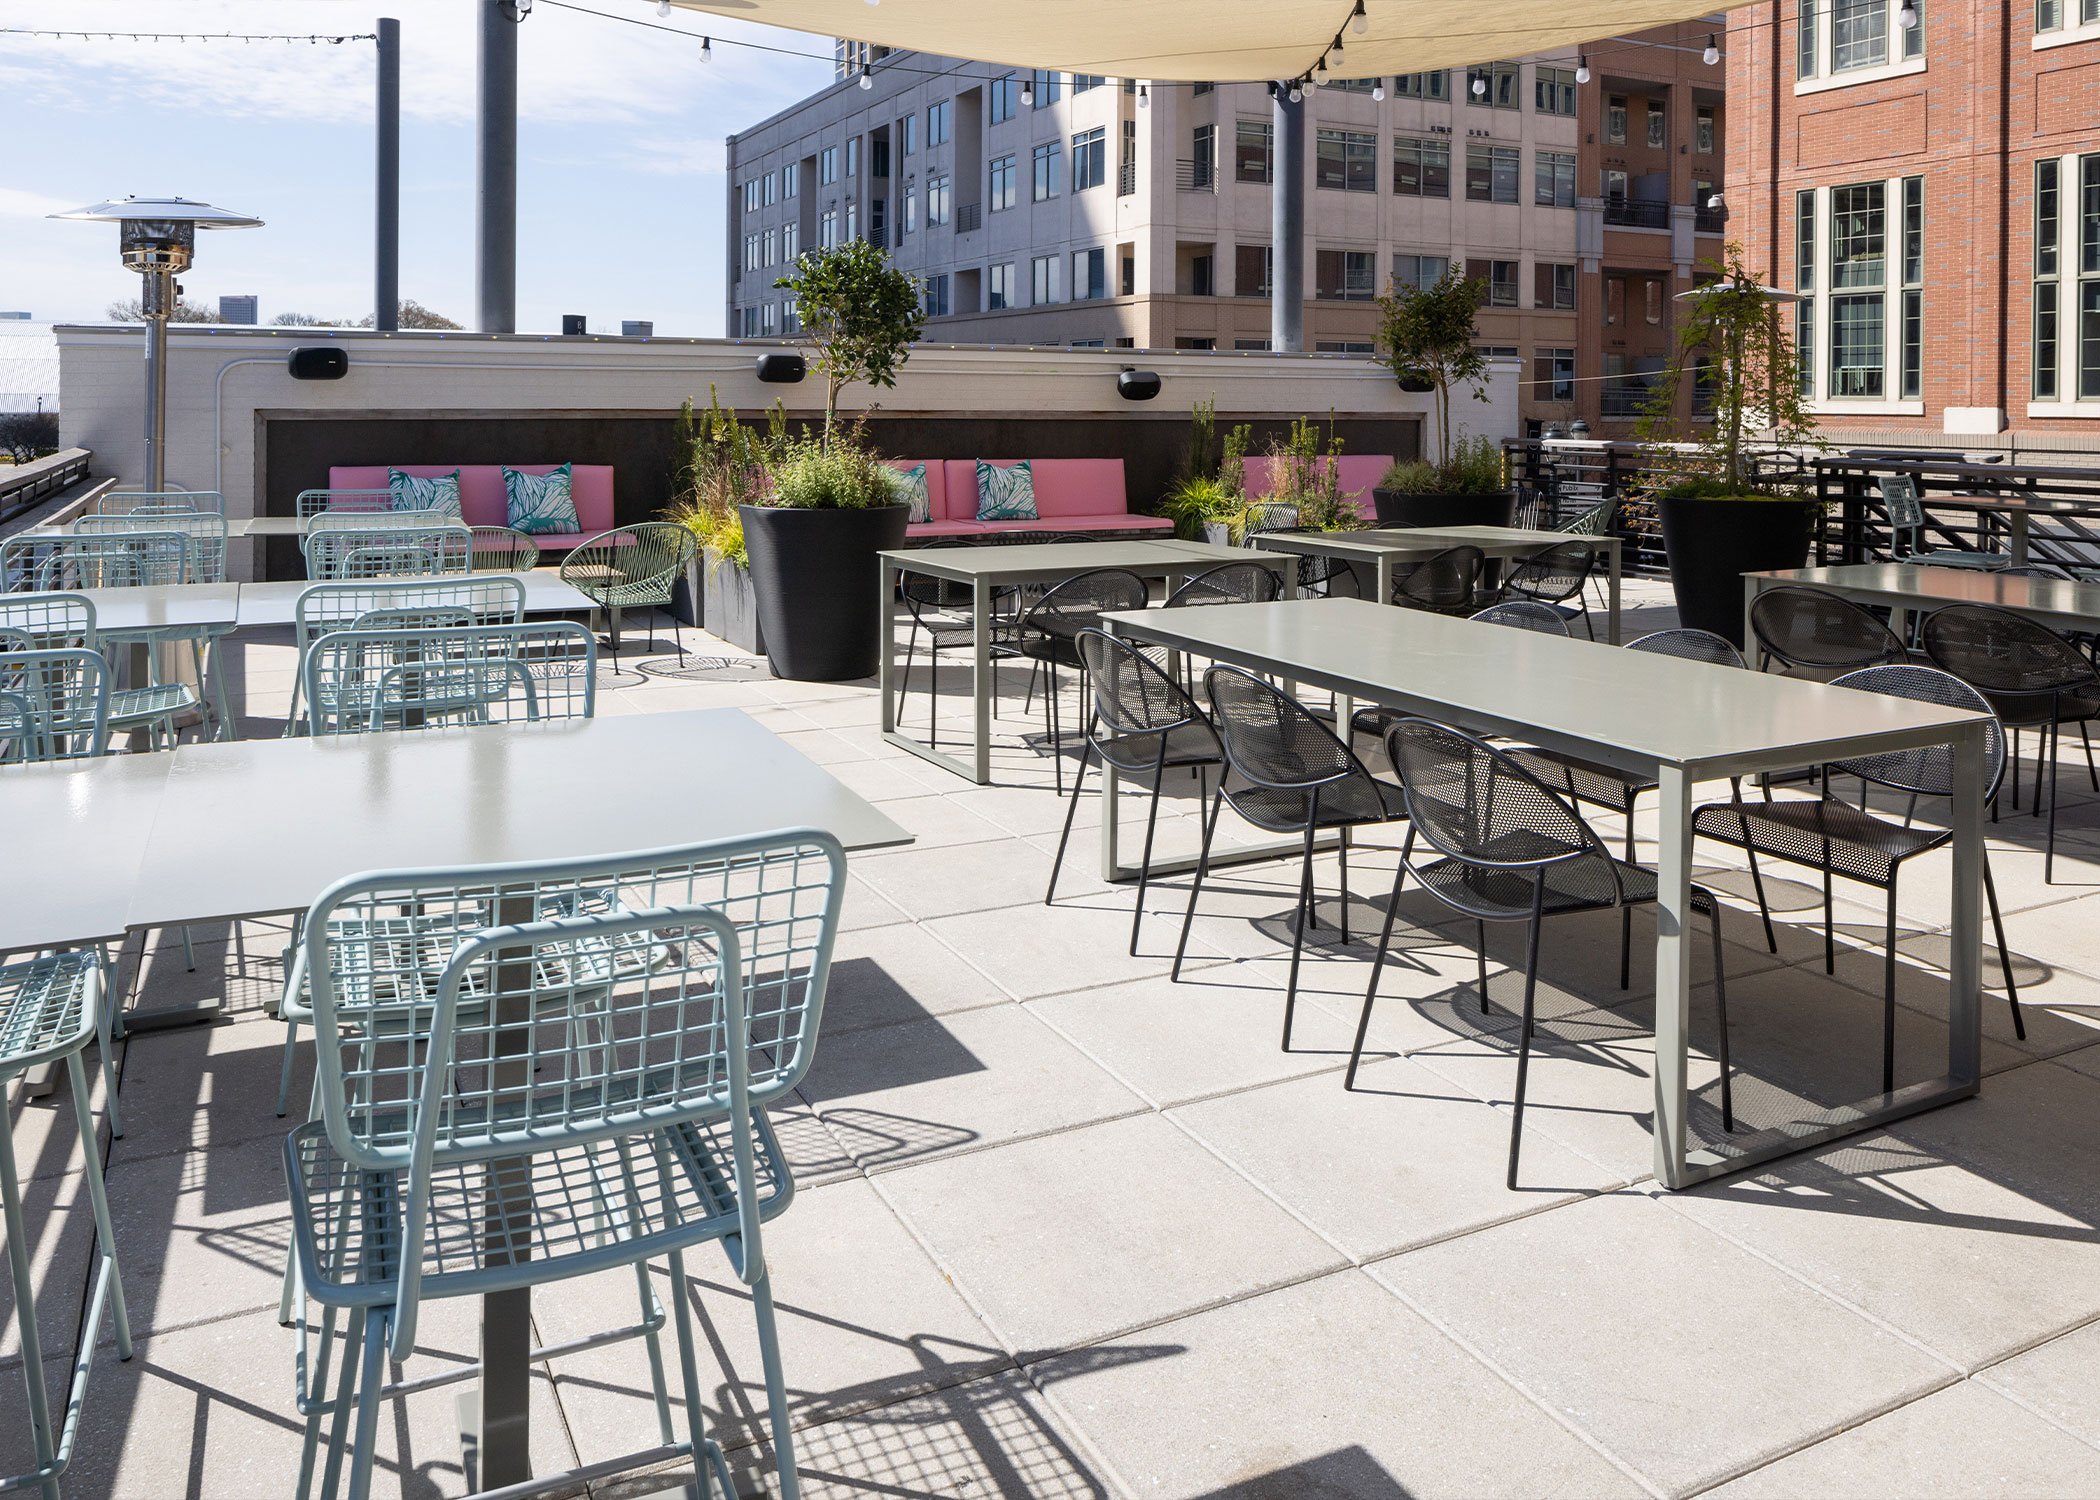 A patio at Azotea with many dusty blue opla chairs and black Hula chairs at steel tables under wide canopies and string lights. Pink couches against the wall in the background.